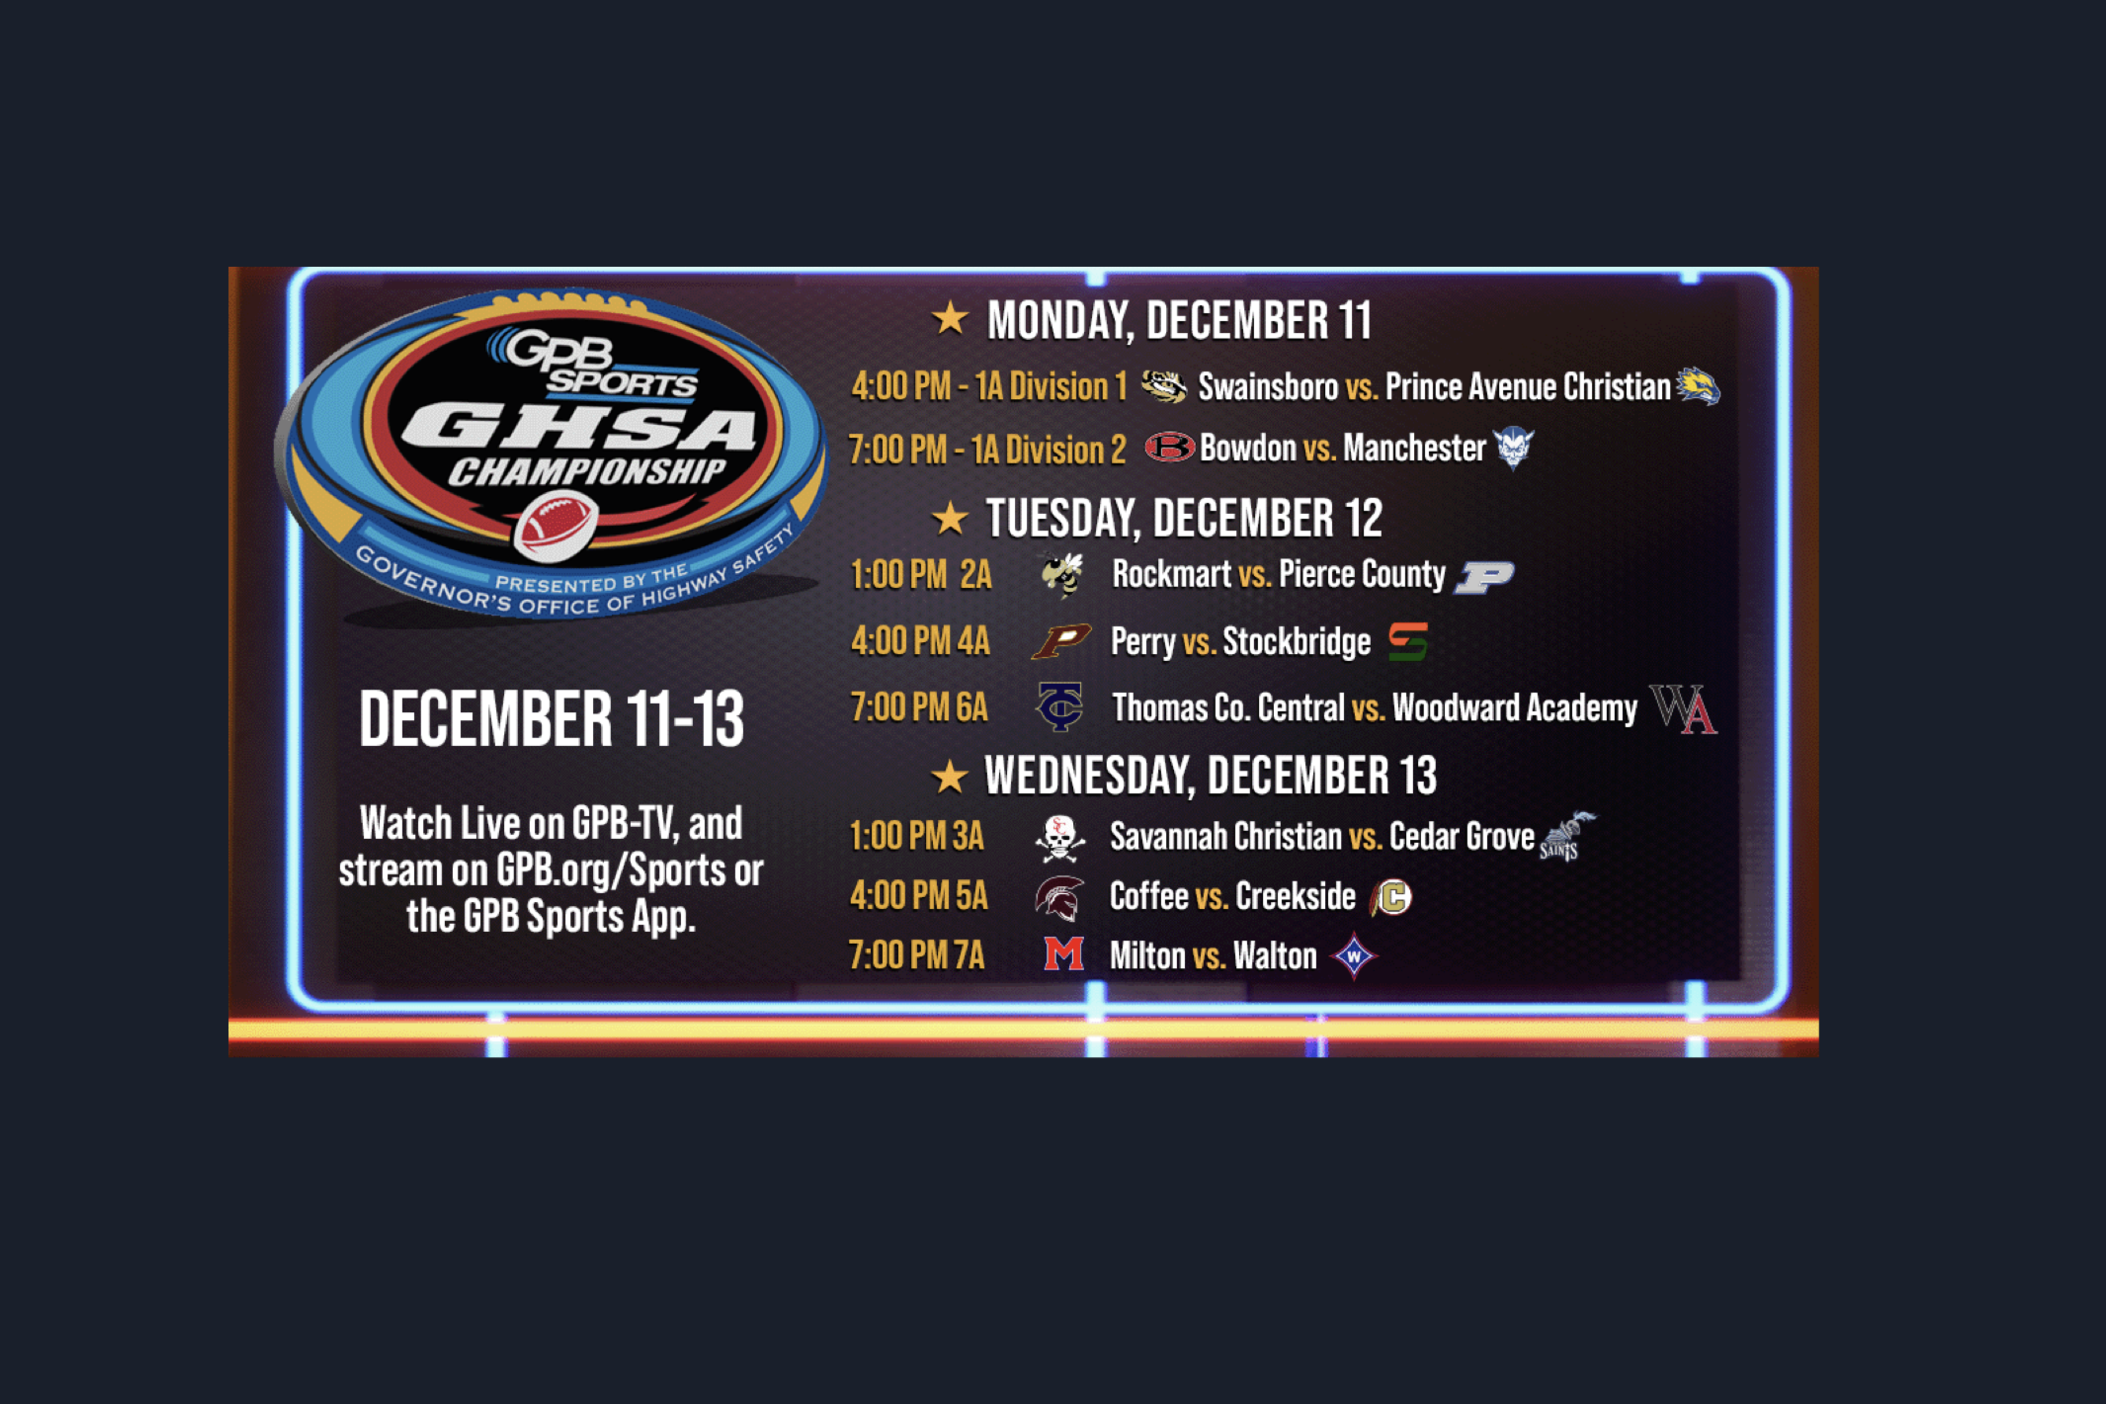 The Georgia High School Association football state championships take place at Atlanta's Mercedes-Benz Stadium Dec. 11 to 13. The games will air on GPB-TV, the GPB Sports app and GPB.org.